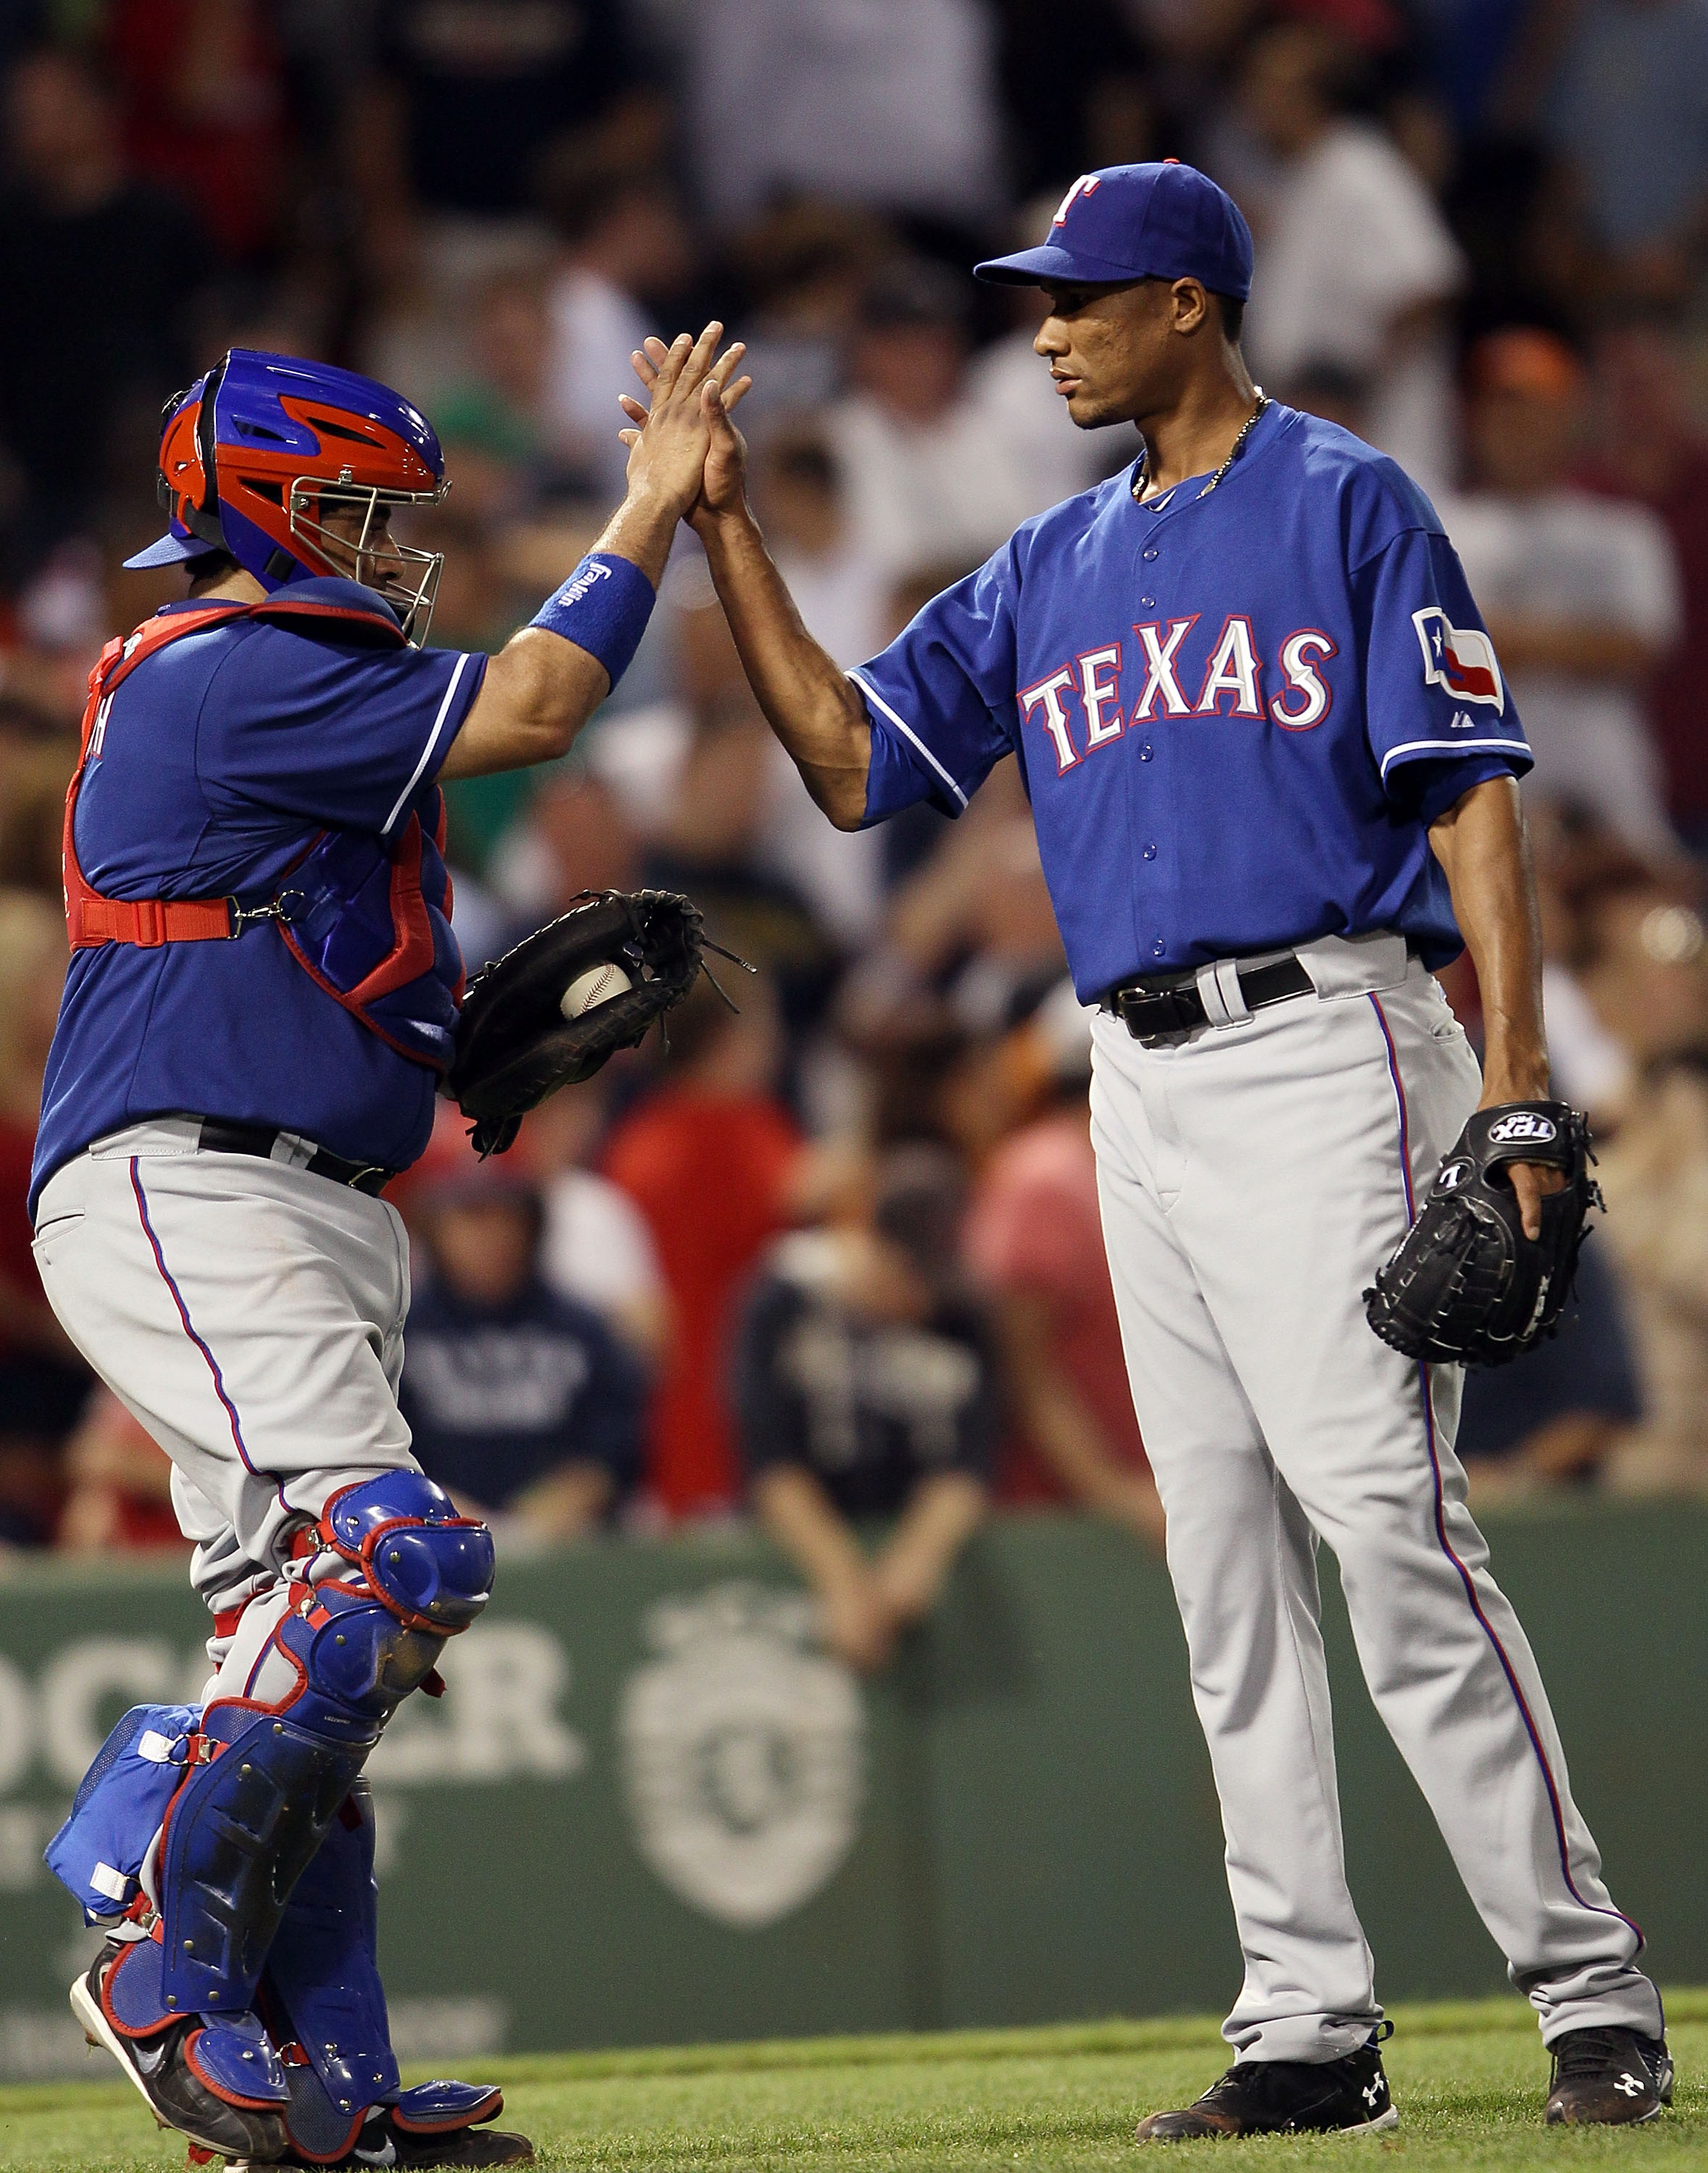 BOSTON - JULY 15:  Alexi Orgando #64 and Bengie Molina #11 of the Texas Rangers celebrate the win over the Boston Red Sox on July 15, 2010 at Fenway Park in Boston, Massachusetts. The Rangers defeated the Red Sox 7-2.  (Photo by Elsa/Getty Images)